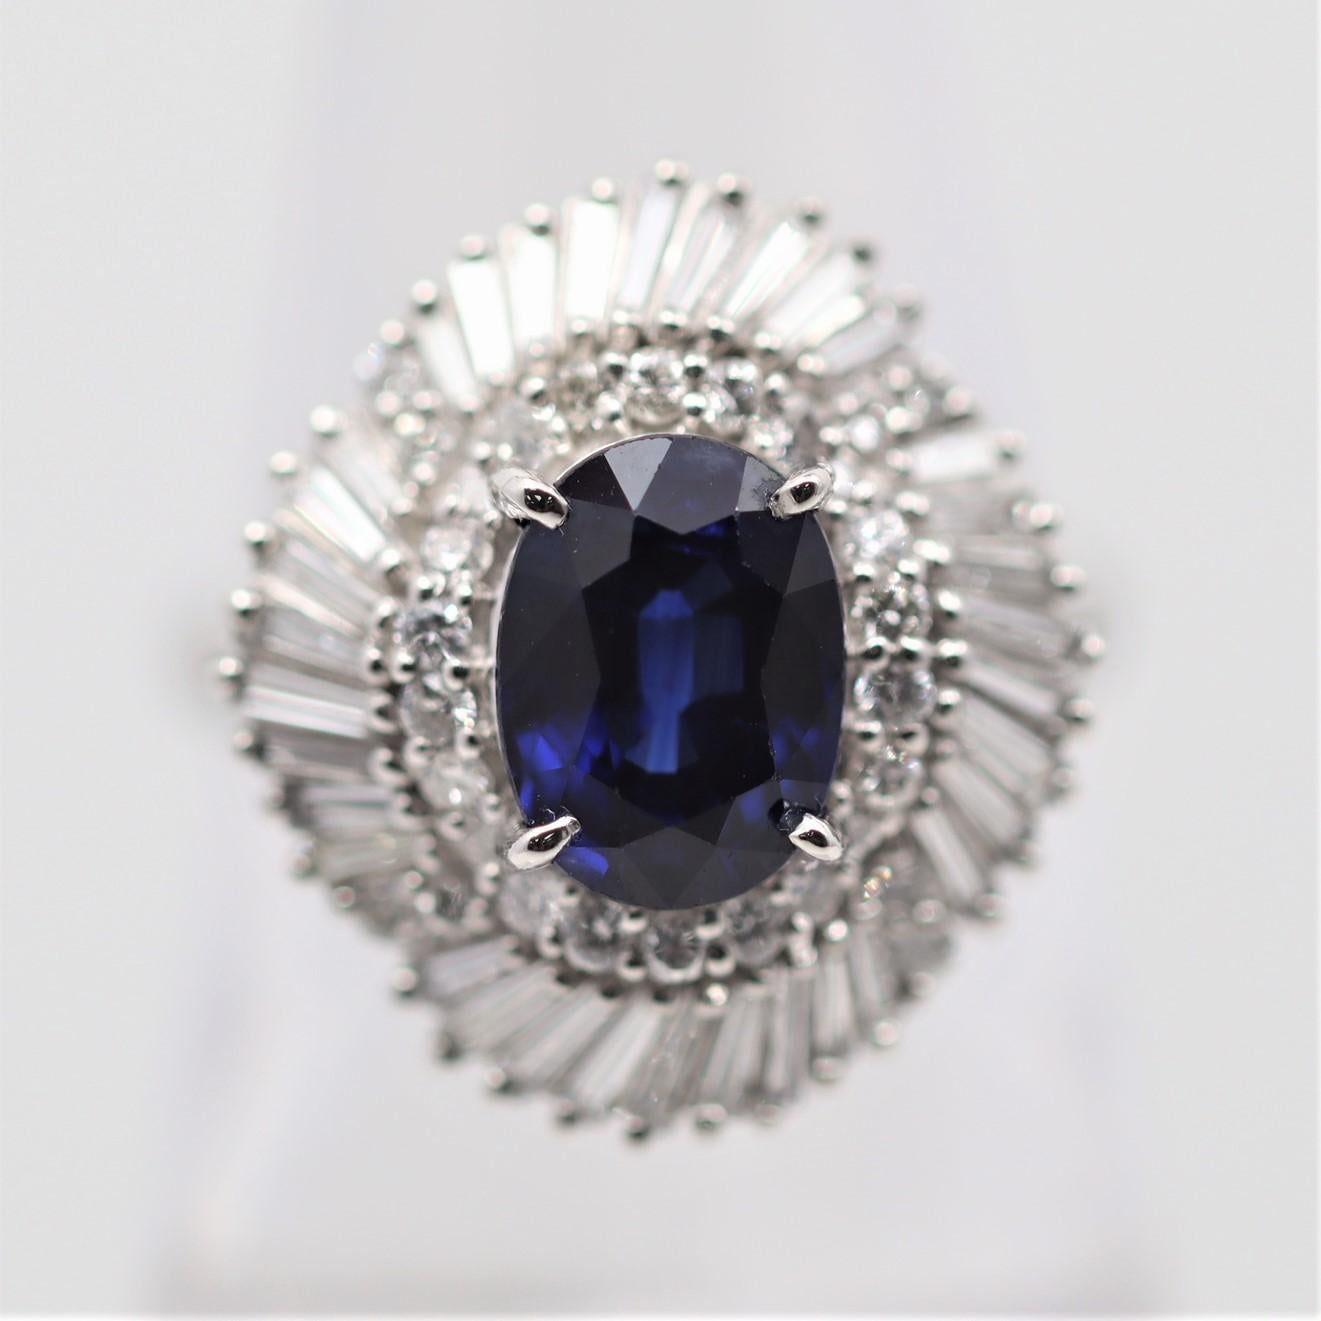 A lovely platinum ring featuring a fine oval-shape sapphire weighing 1.27 carats. It has a rich intense royal-blue color that is simply exceptional. It is set in the middle of a spray of diamonds, weighing 1.00 carat, and creating a ballerina style